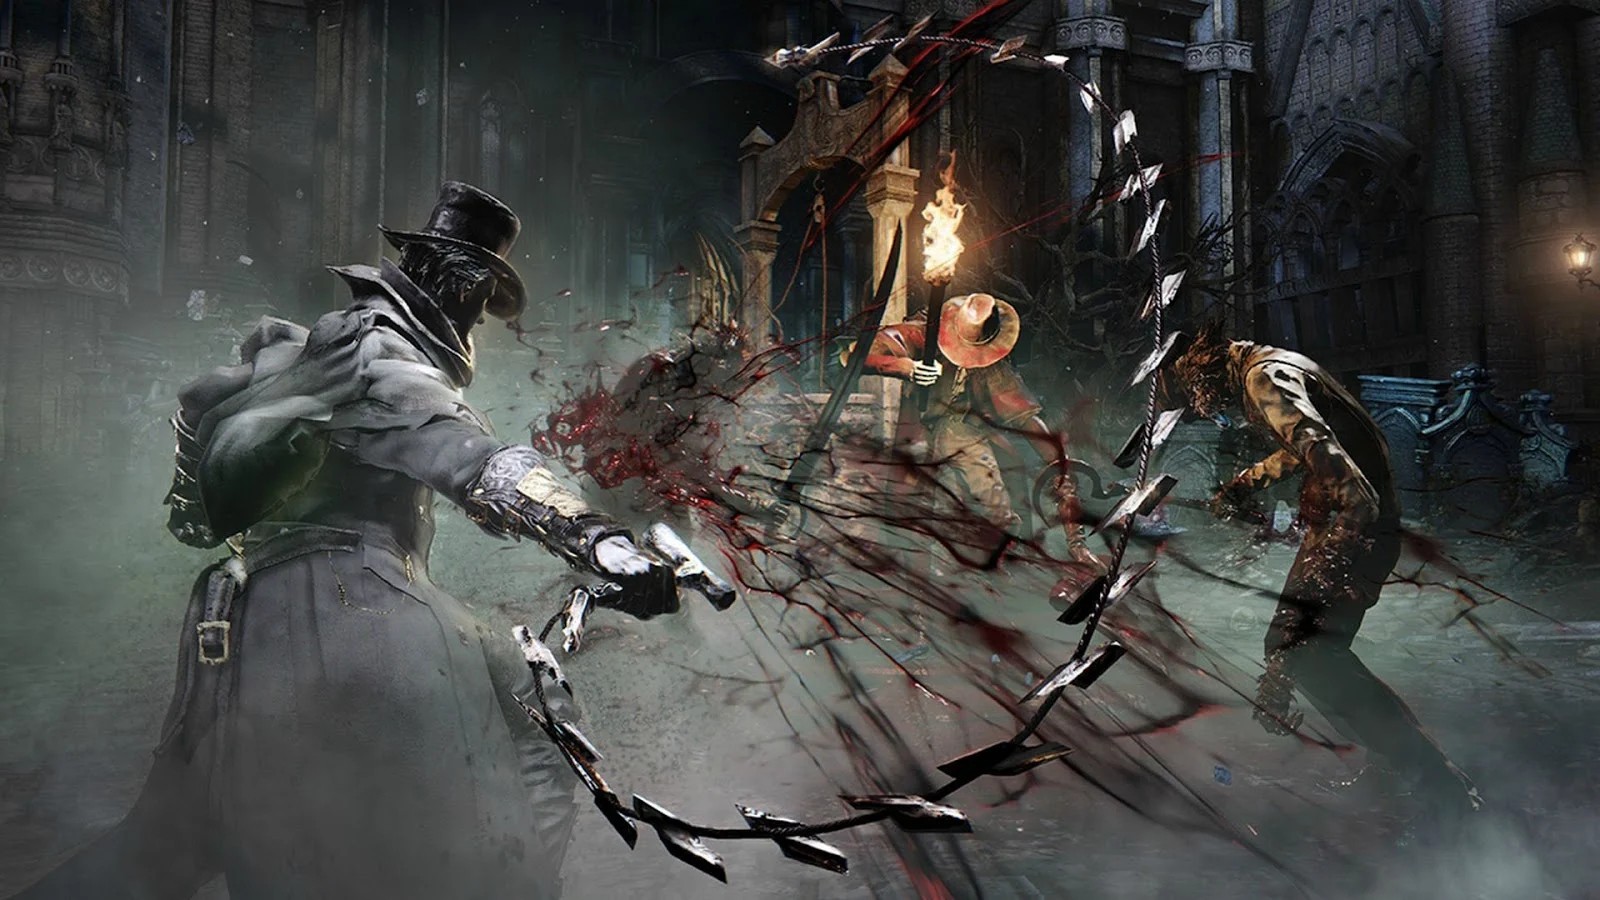 The Threaded Cane in transformed whip mode makes it an effective tool to annihilate mobs. Credit: FromSoftware